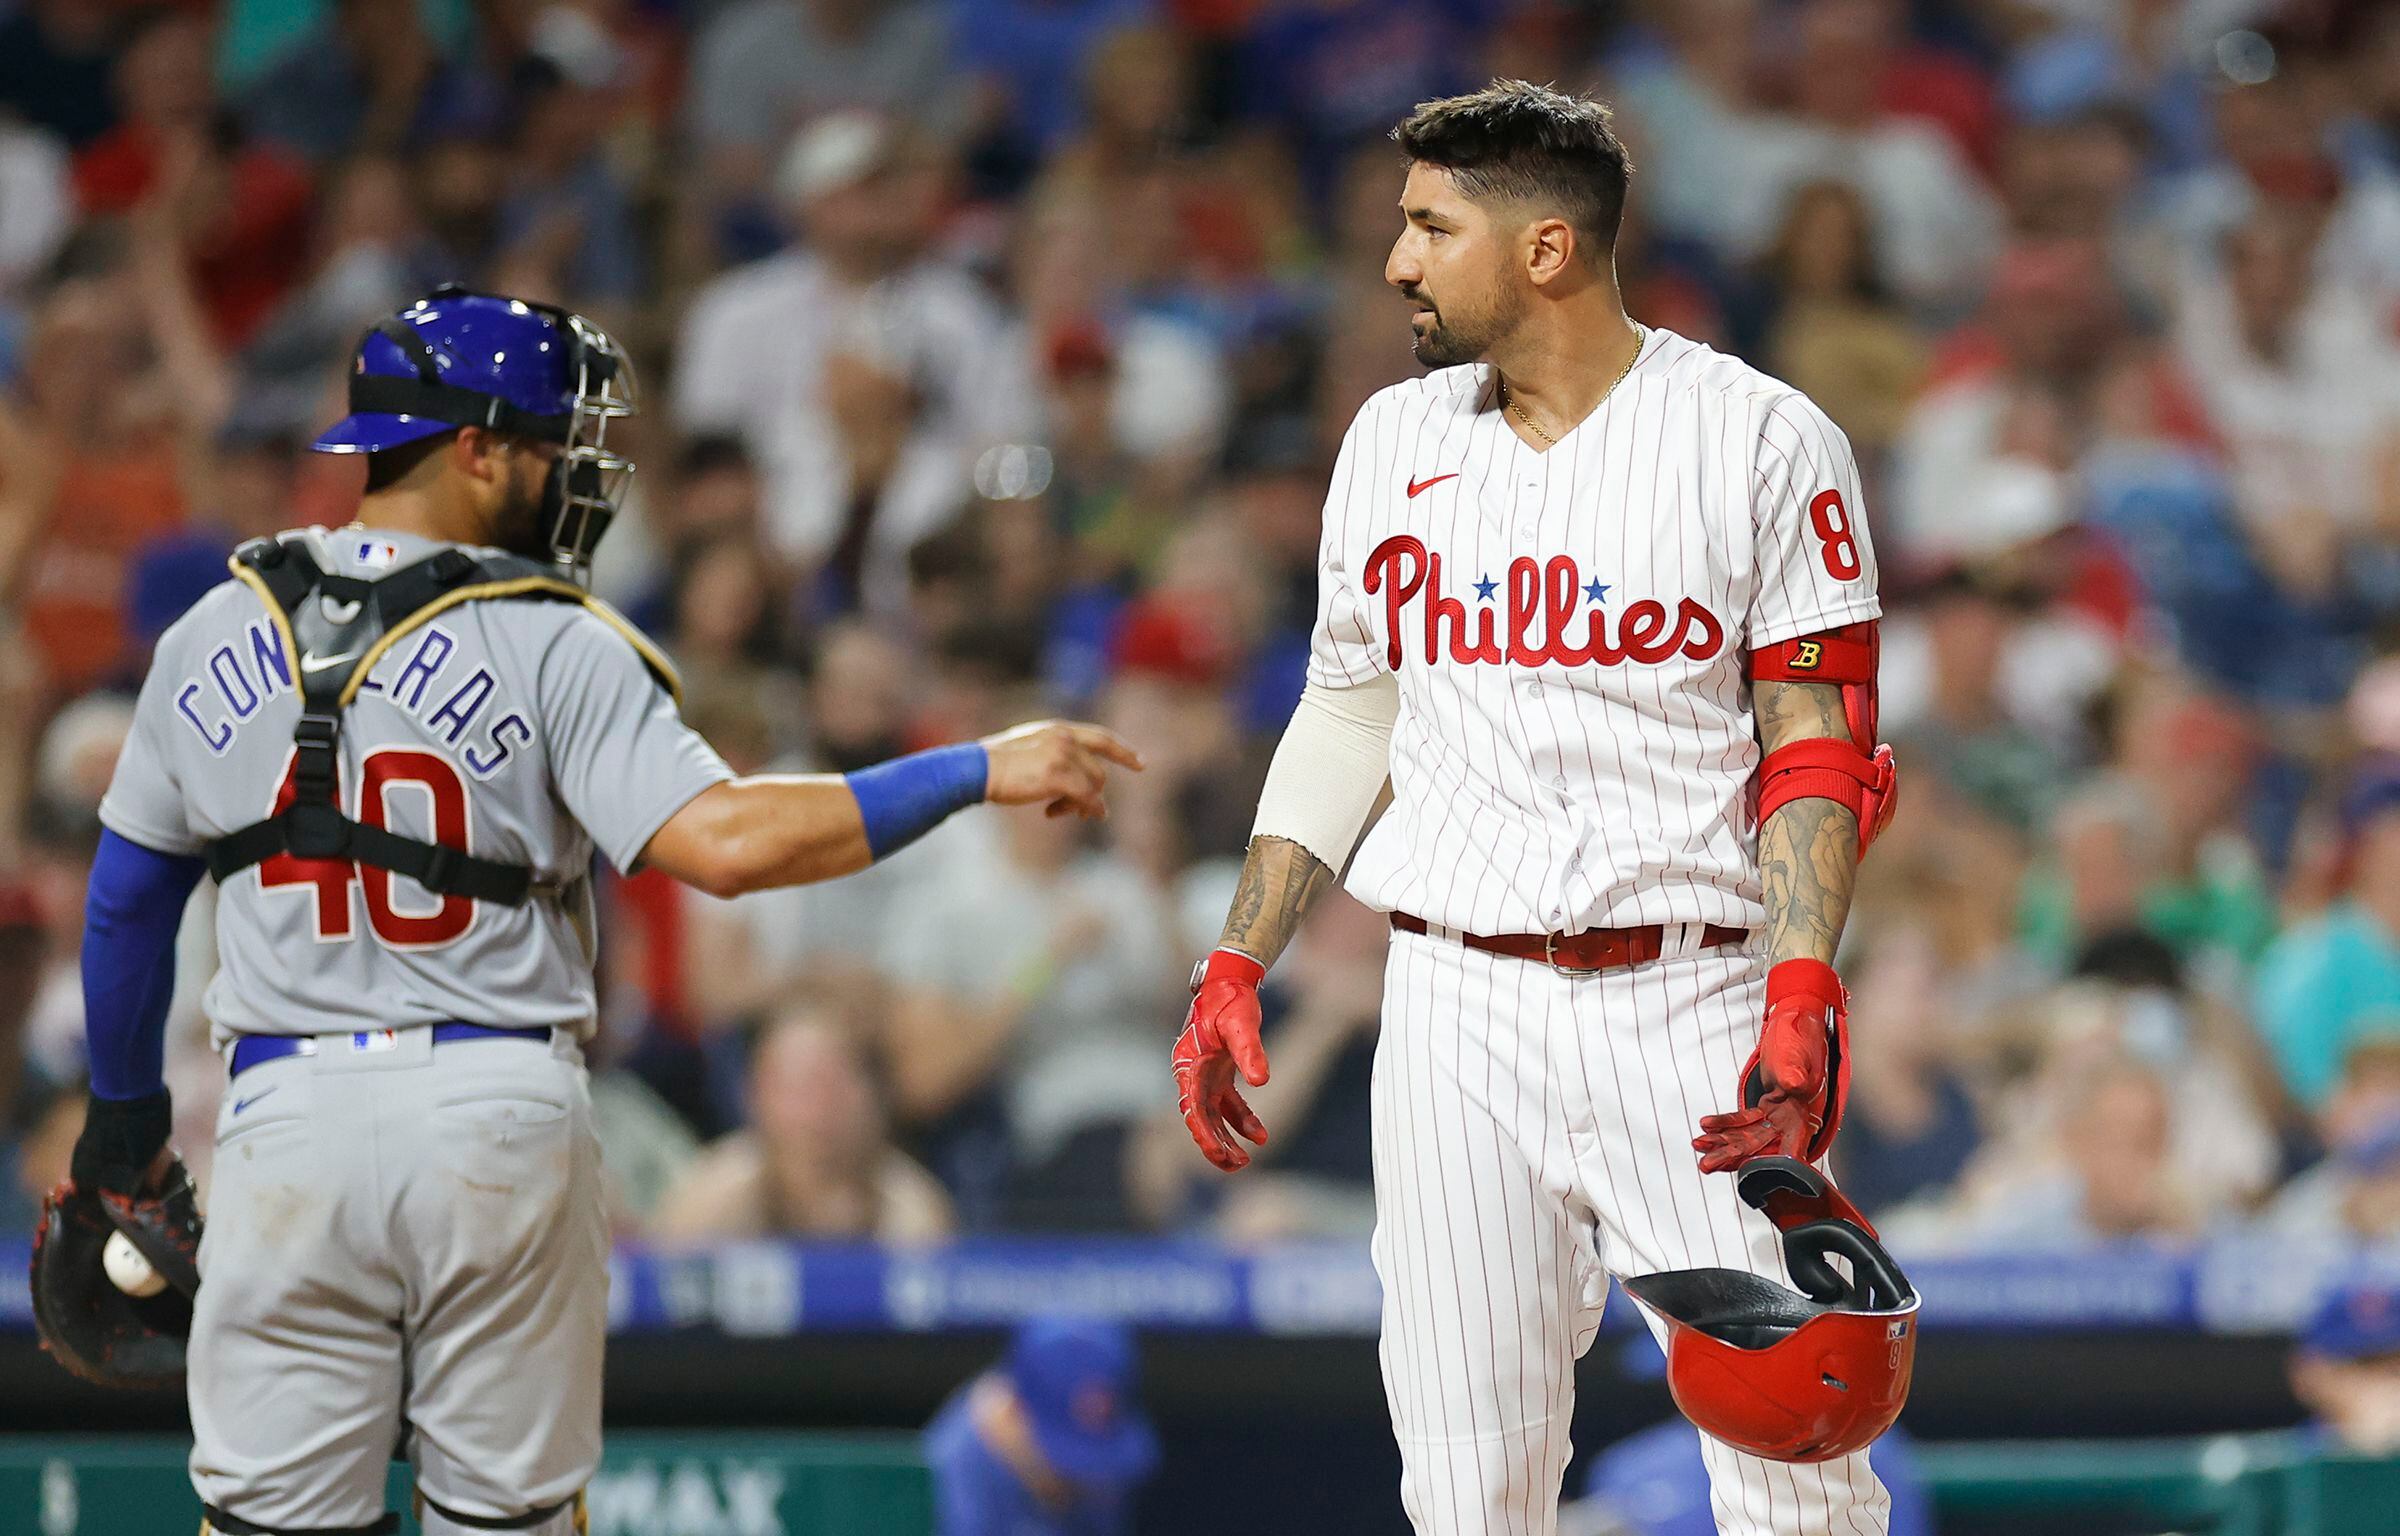 With future again unclear, Contreras returns as Cubs beat Phillies